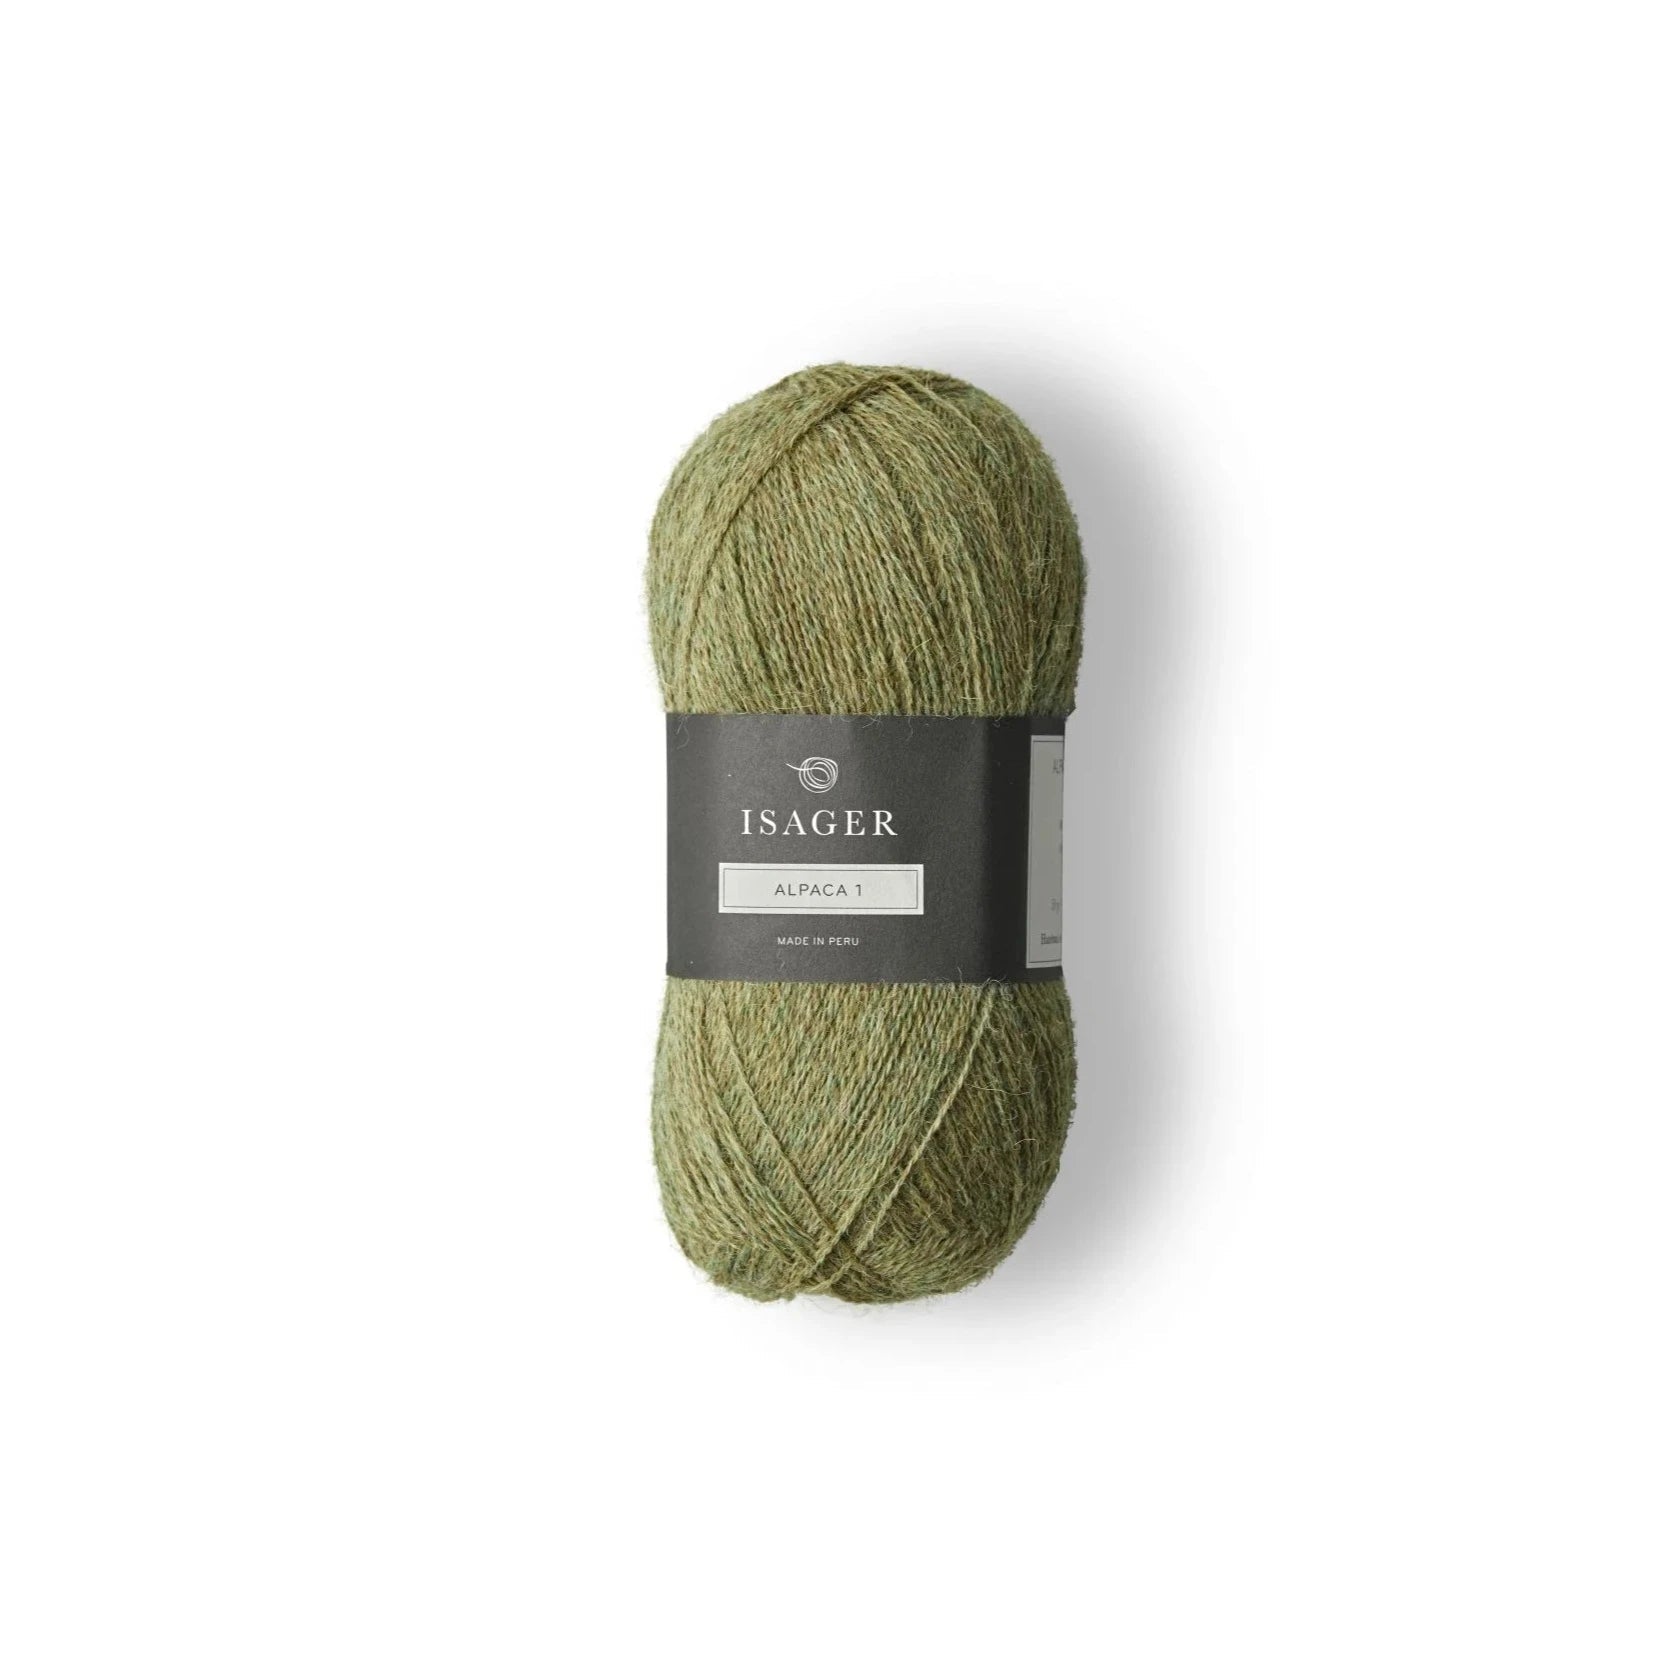 Isager Alpaca 1 - Isager - Thyme - The Little Yarn Store